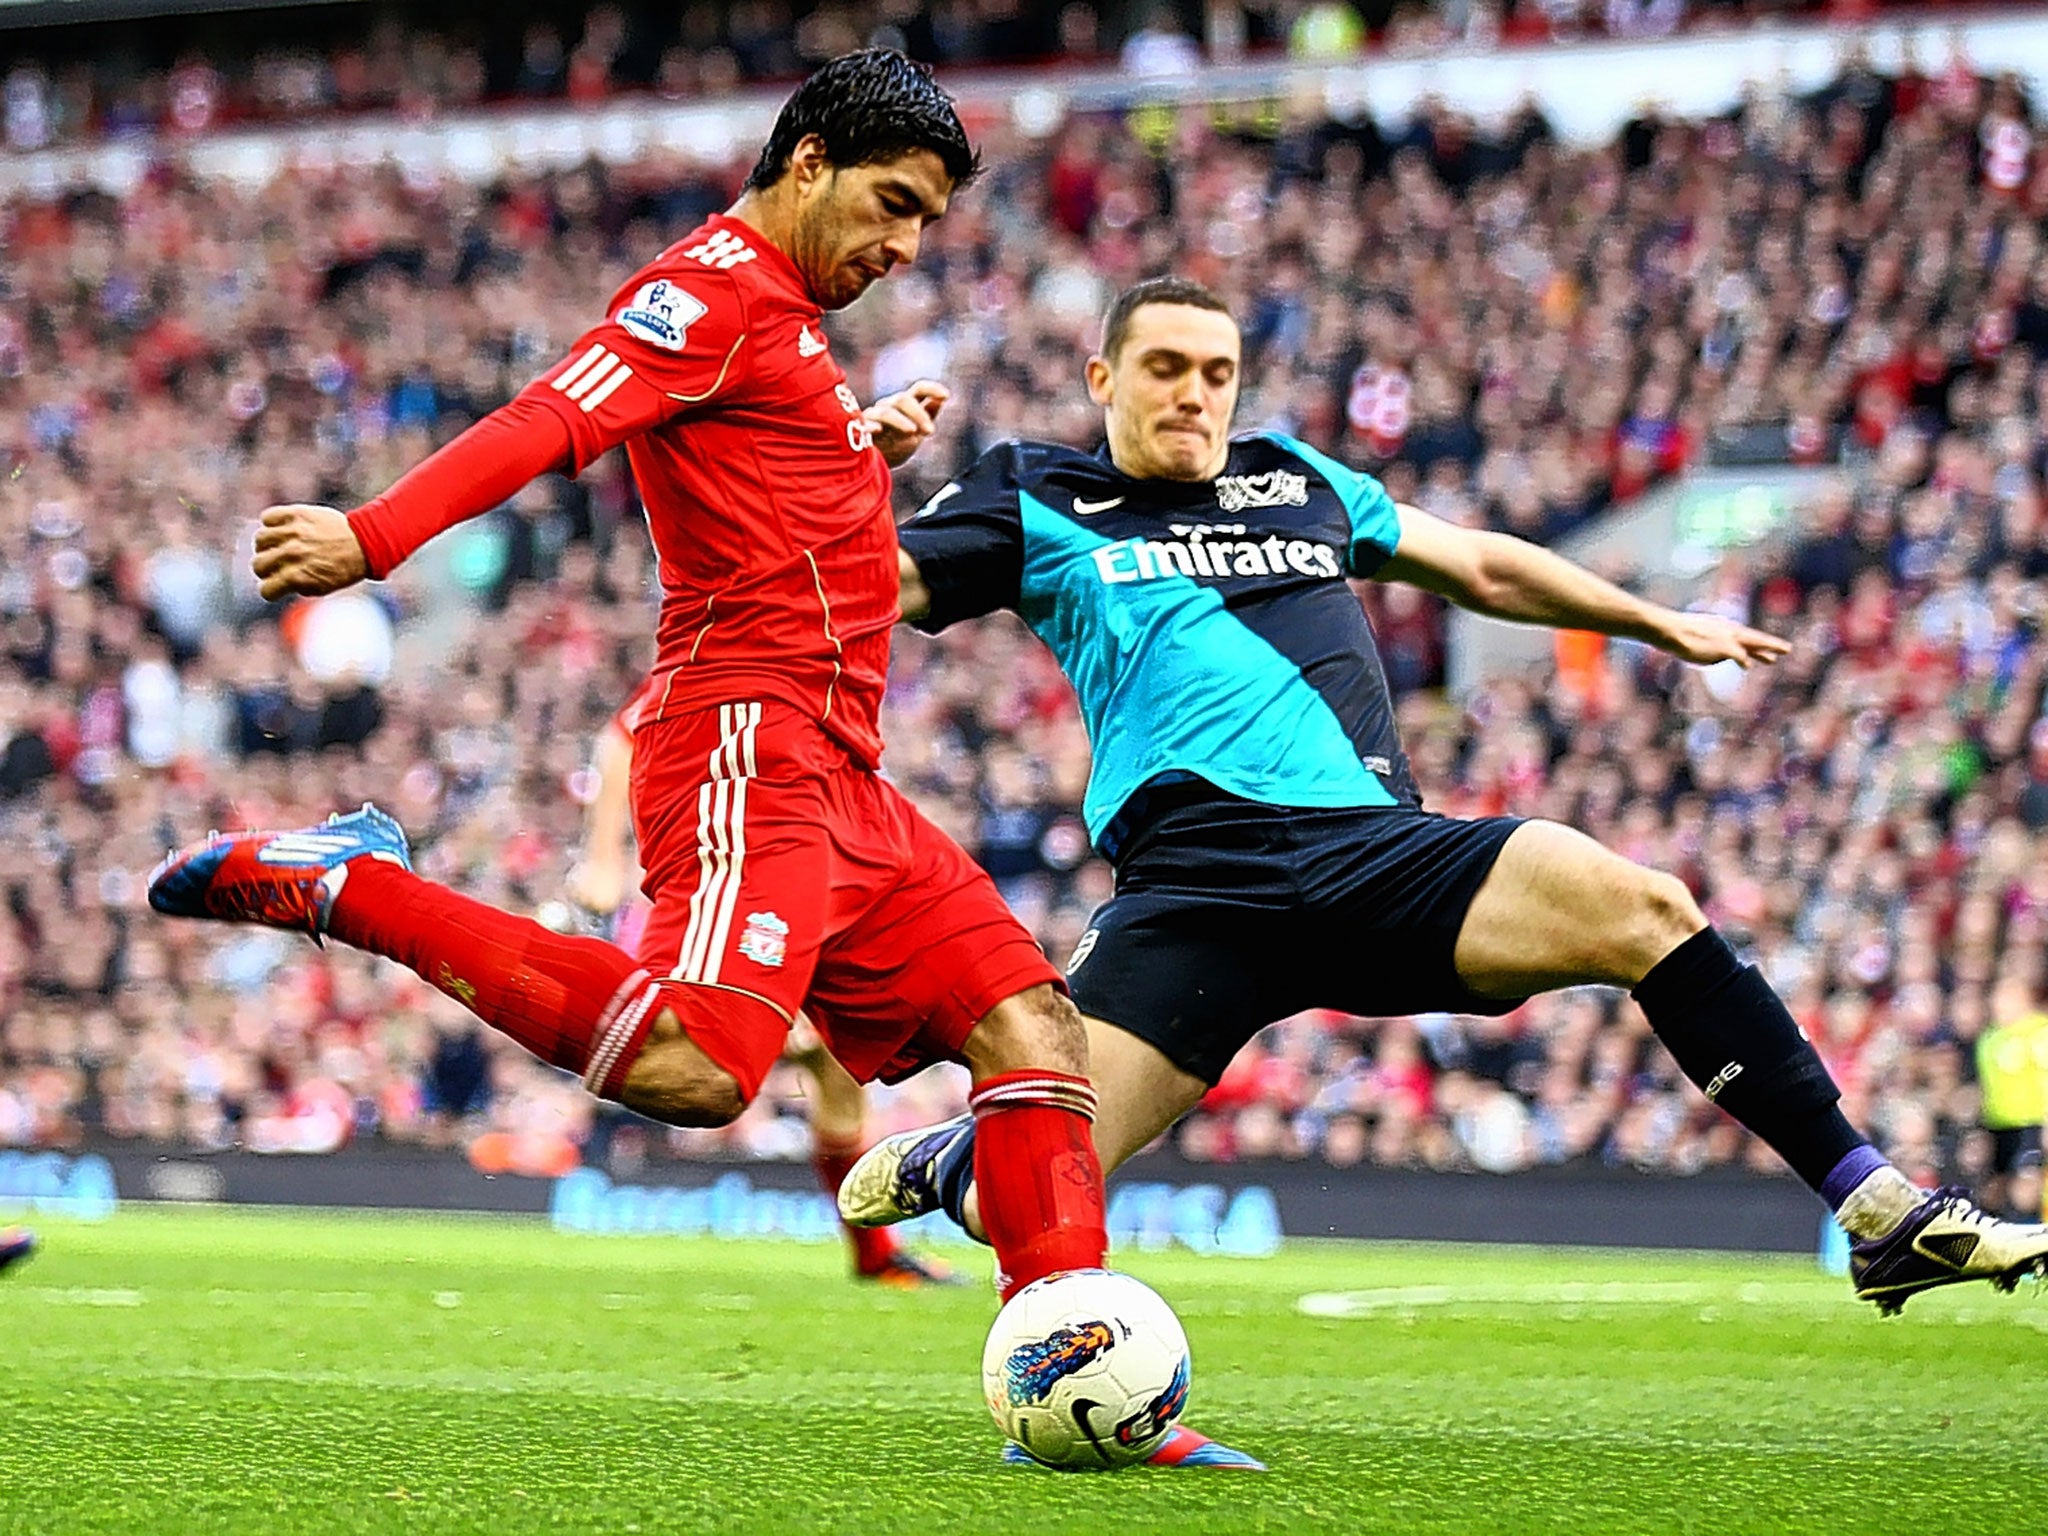 Luis Suarez (left) playing for Liverpool against Arsenal in 2012. The confusion over Arsenal’s move for him a year later arose from a misreading of his complex contract